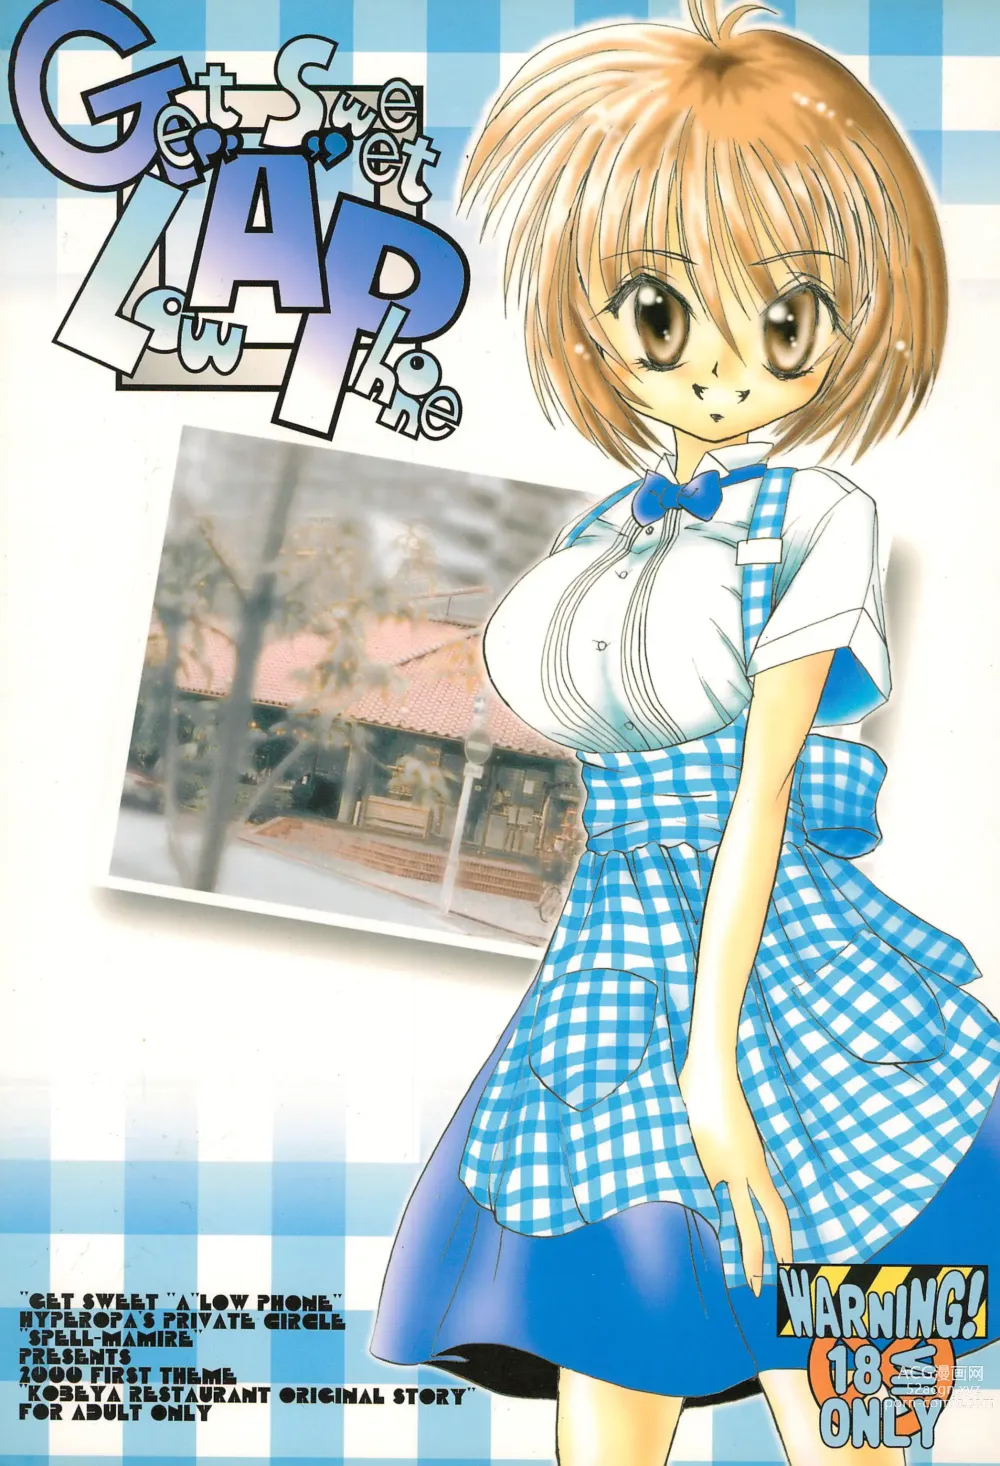 Page 1 of doujinshi Get Sweet ”A” Low Phone